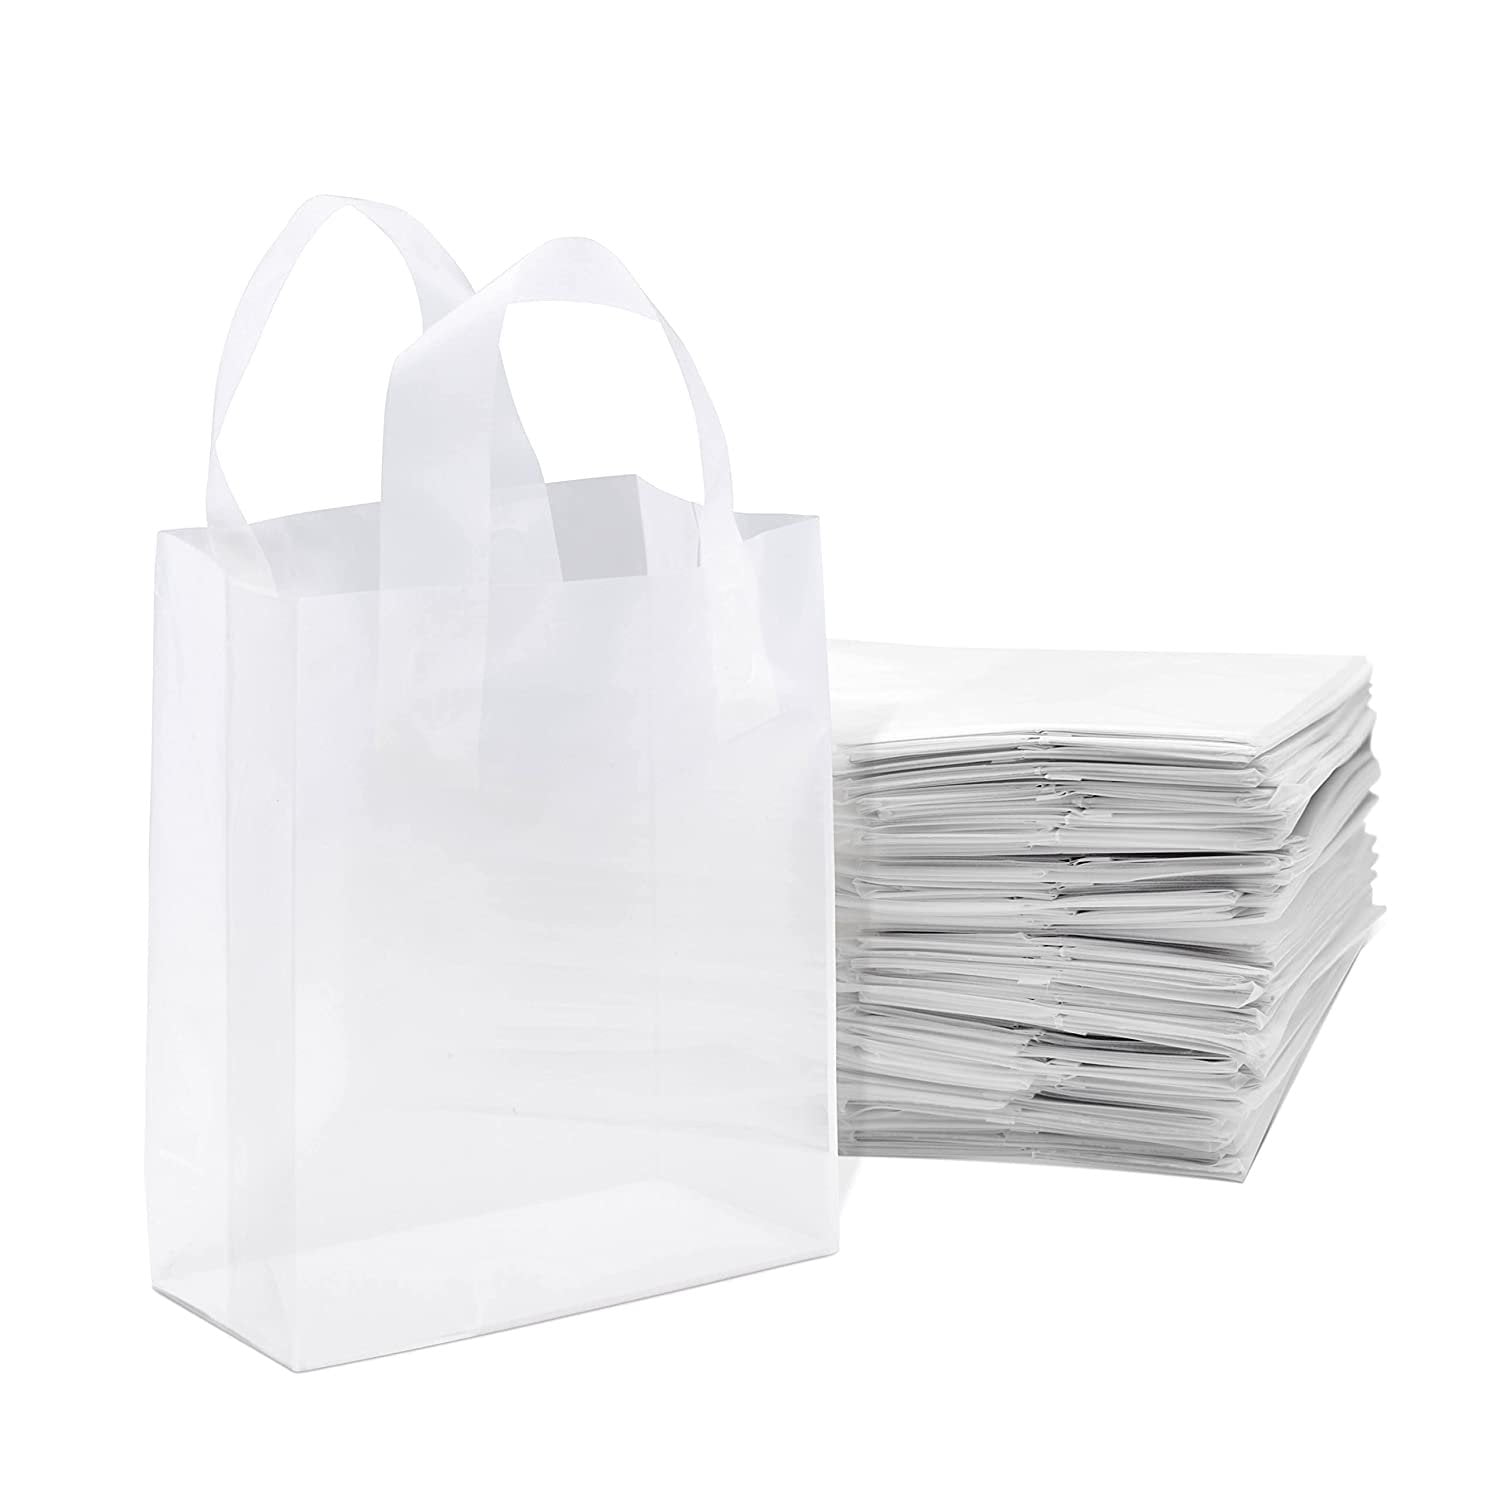 NEW SILVER COLOURED PATCH HANDLE PLASTIC CARRIER BAGS RETAIL SHOP STORE 